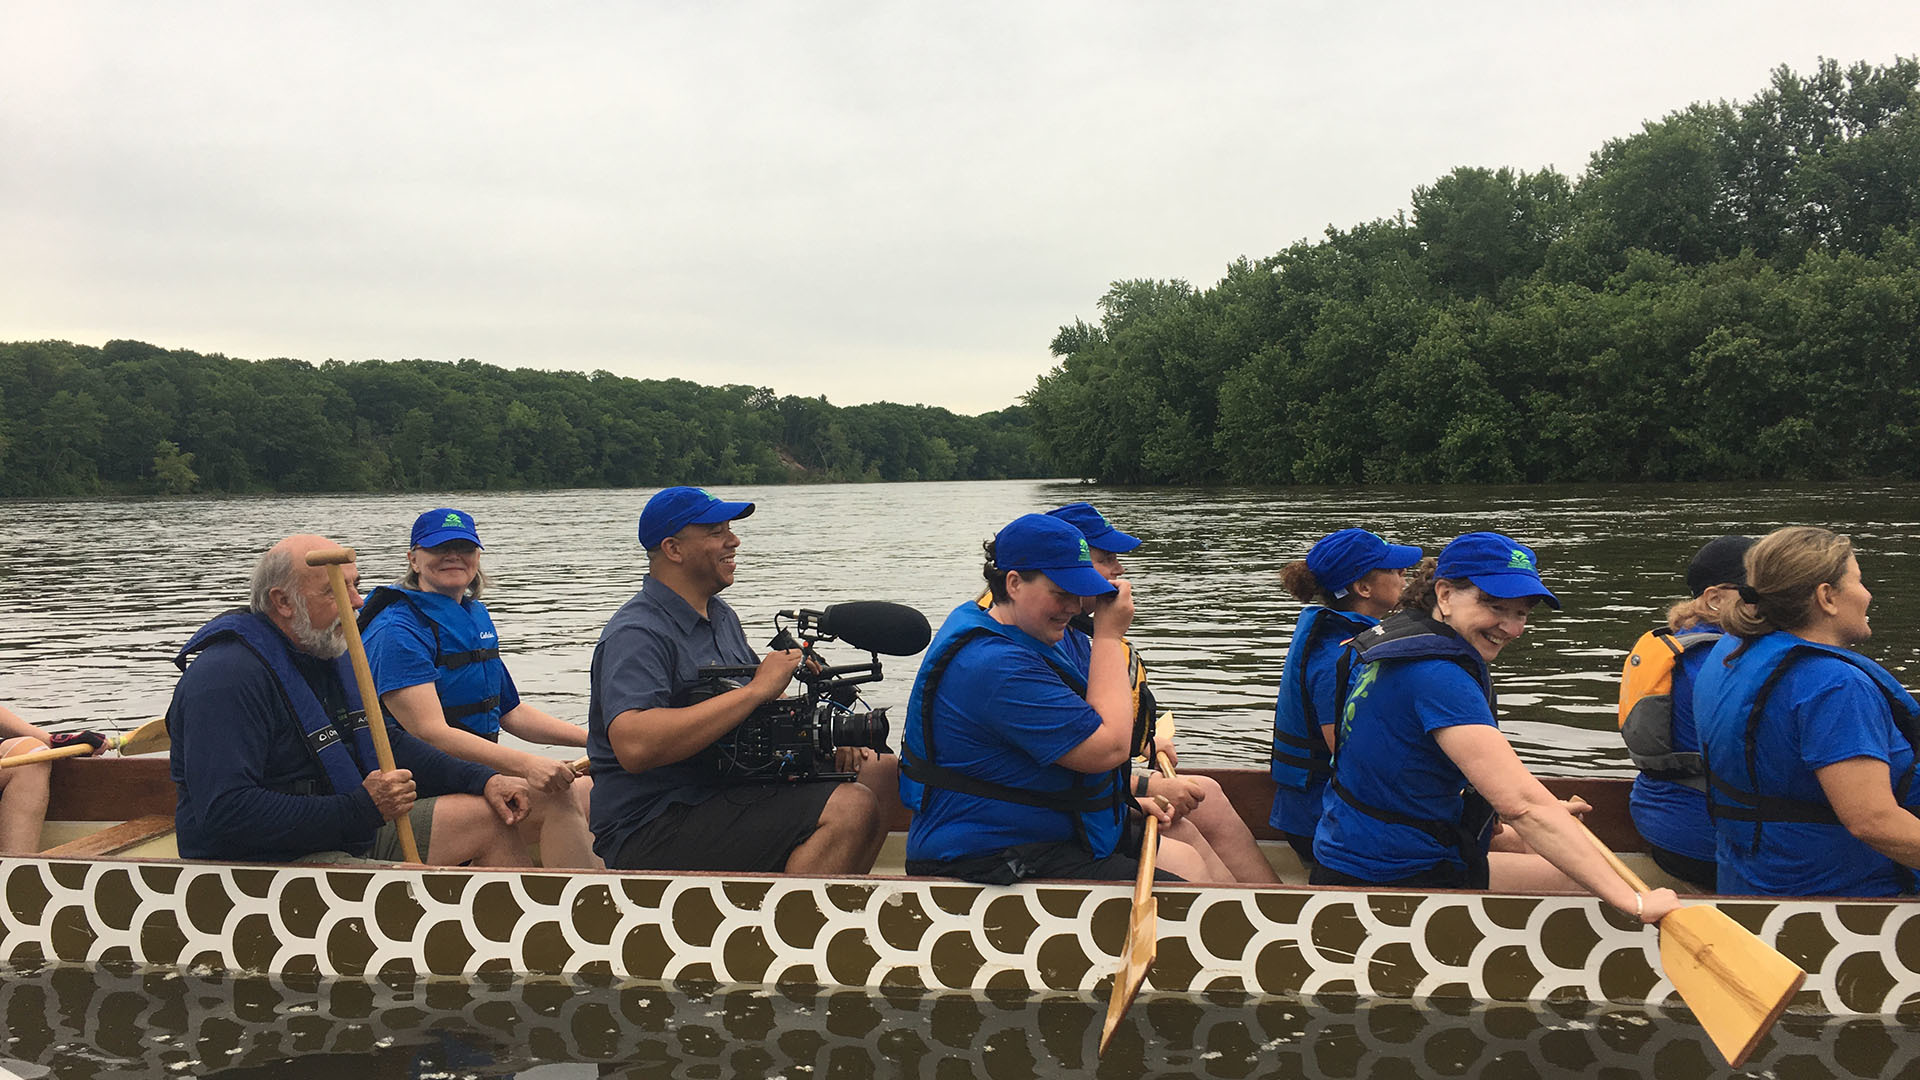 Cinematographer Corey Lillard films the Paradise City Dragon Boat team from inside the boat.